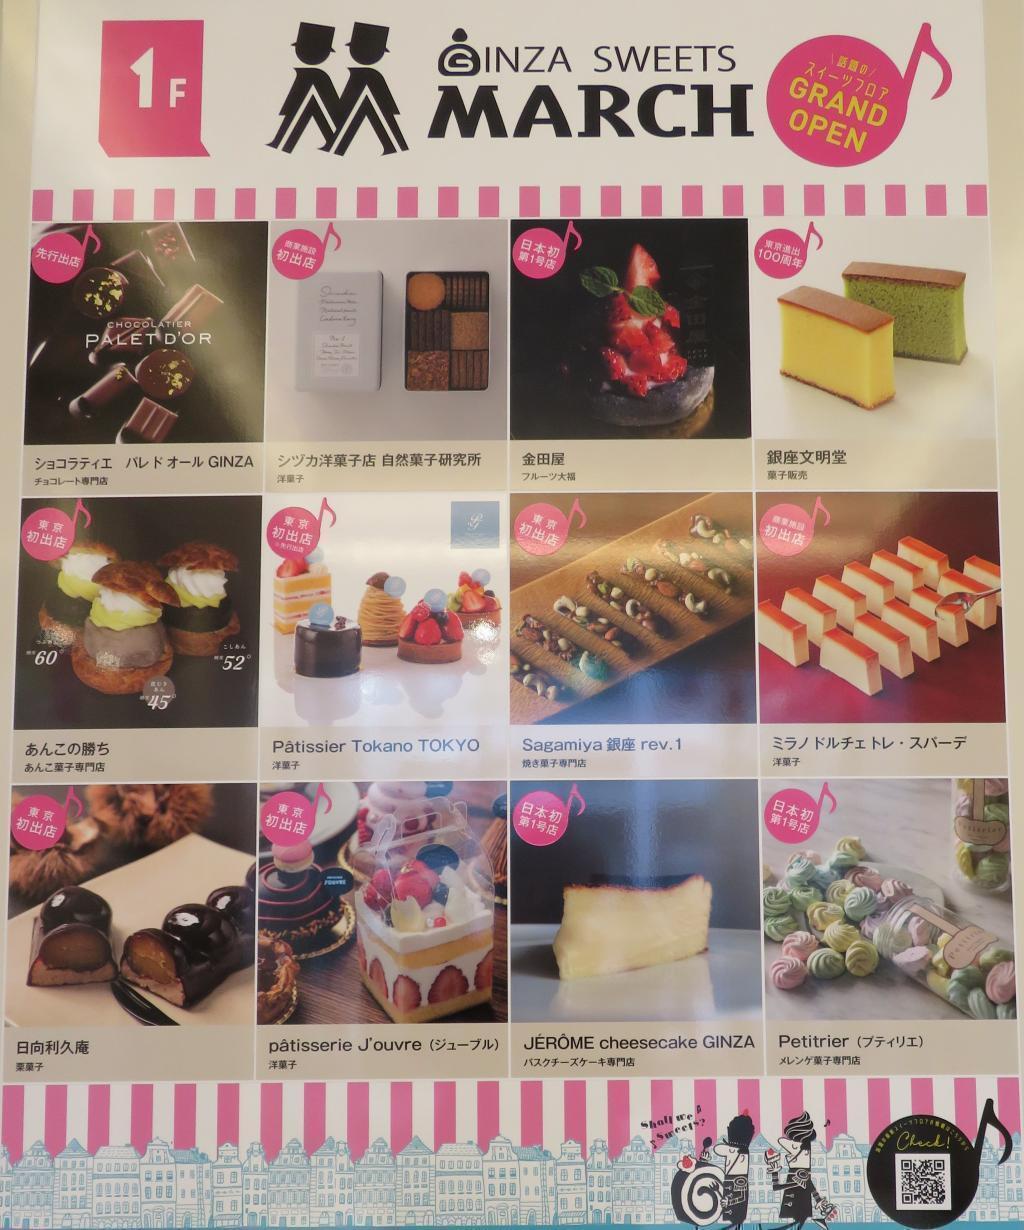 EXIT MELSA GINZA SWEETS MARCH の紹介 EXIT MELSA ”GINZA SWEETS MARCH”、ワークマン女子も オープン